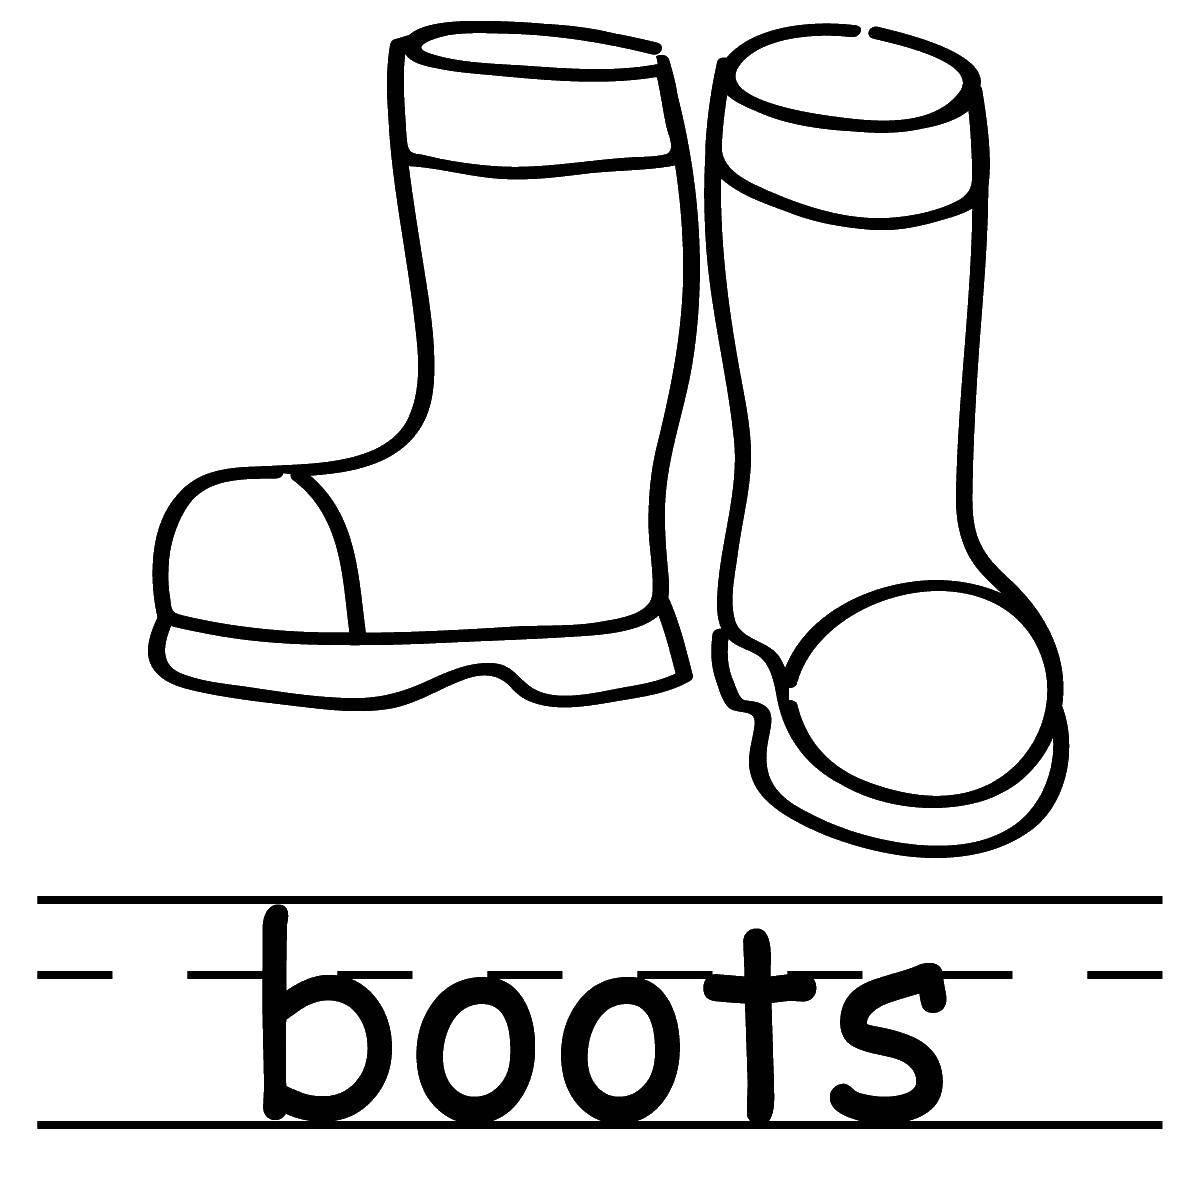 Coloring Boots. Category shoes. Tags:  shoes, boots, boots.